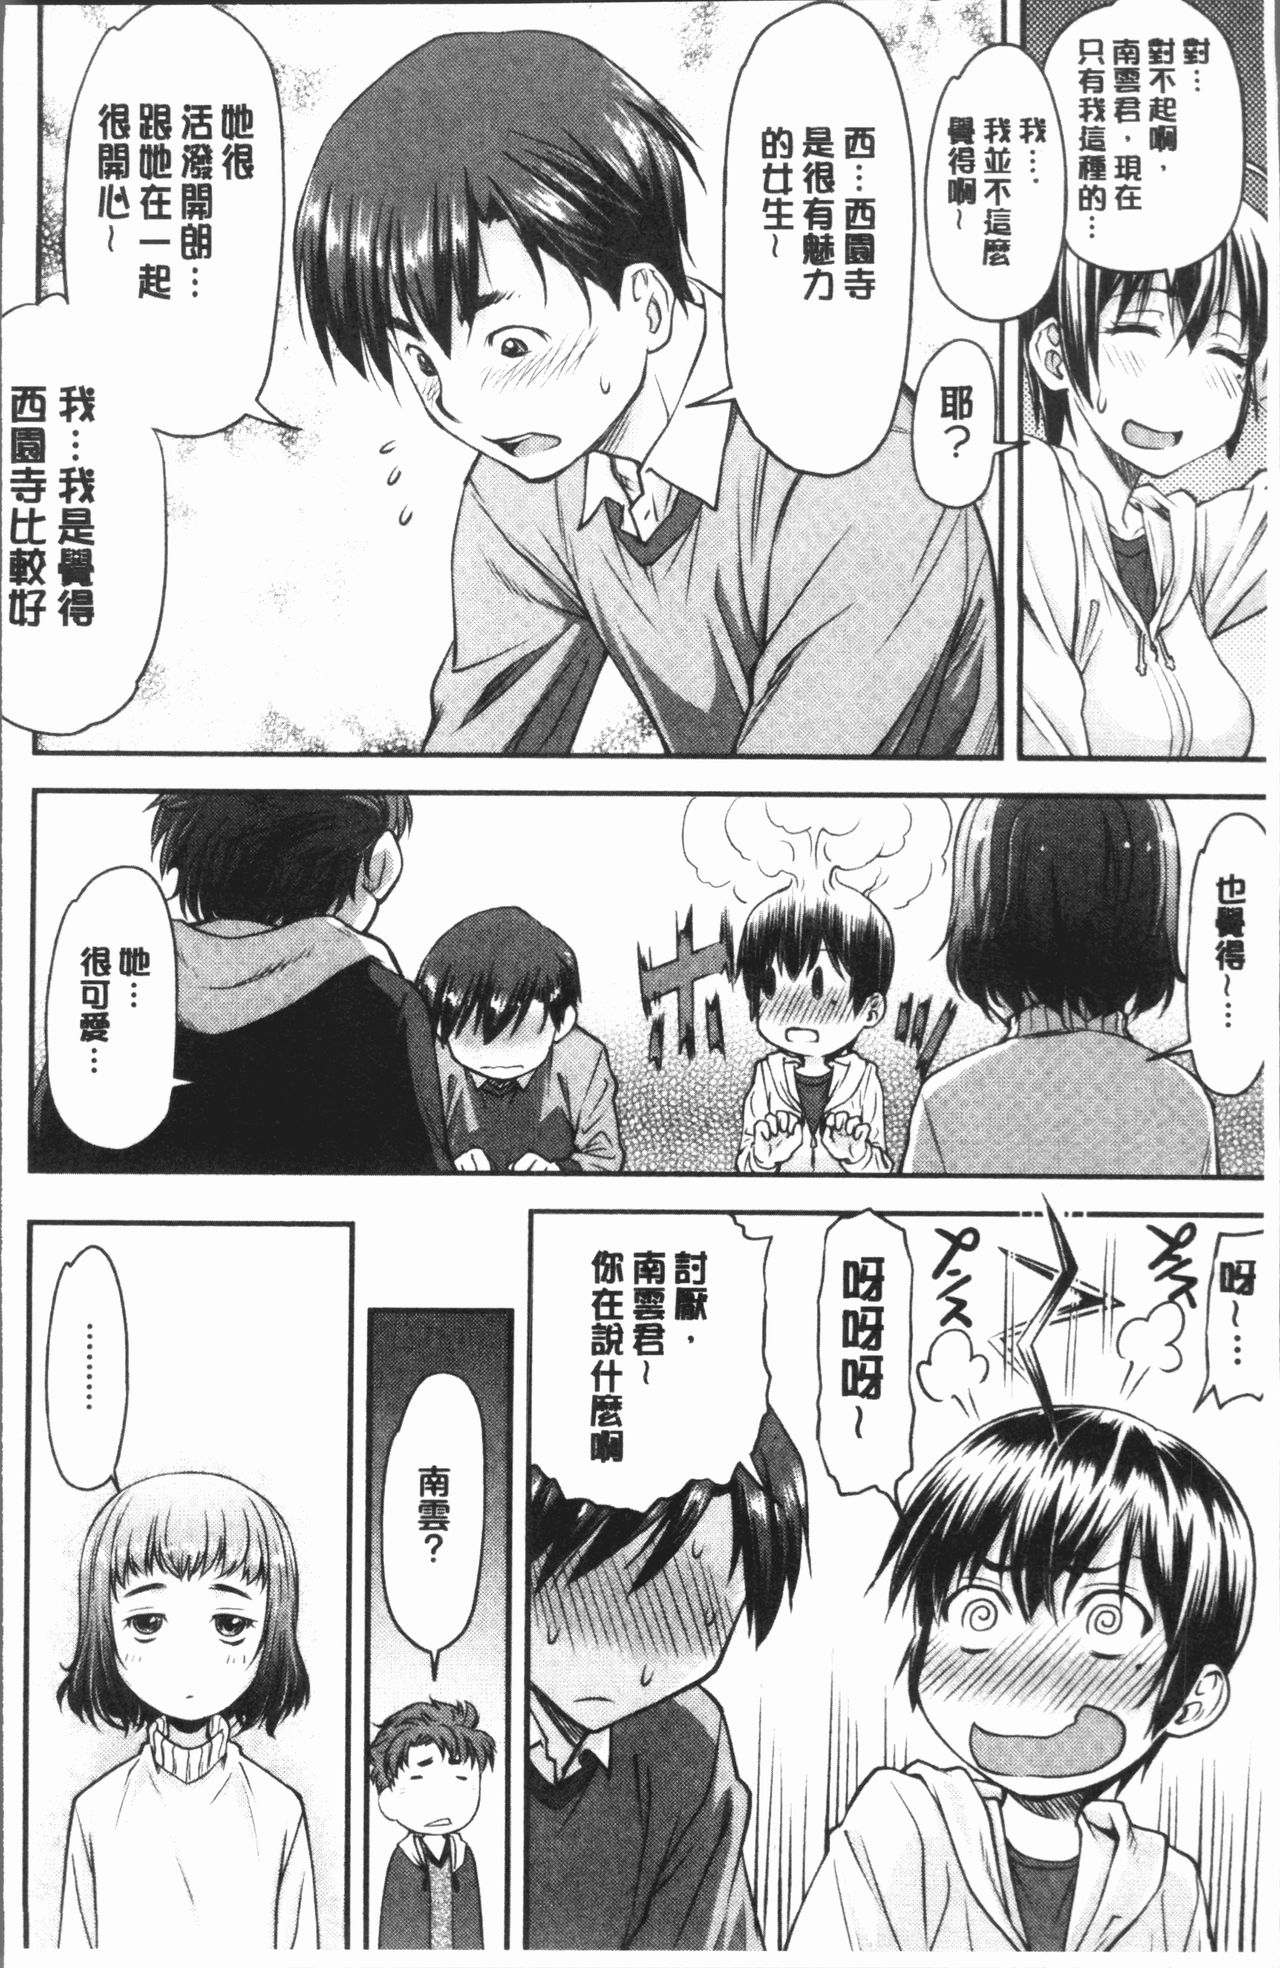 [Nagare Ippon] Kaname Date Jou | 加奈美Date 上 [Chinese] page 16 full